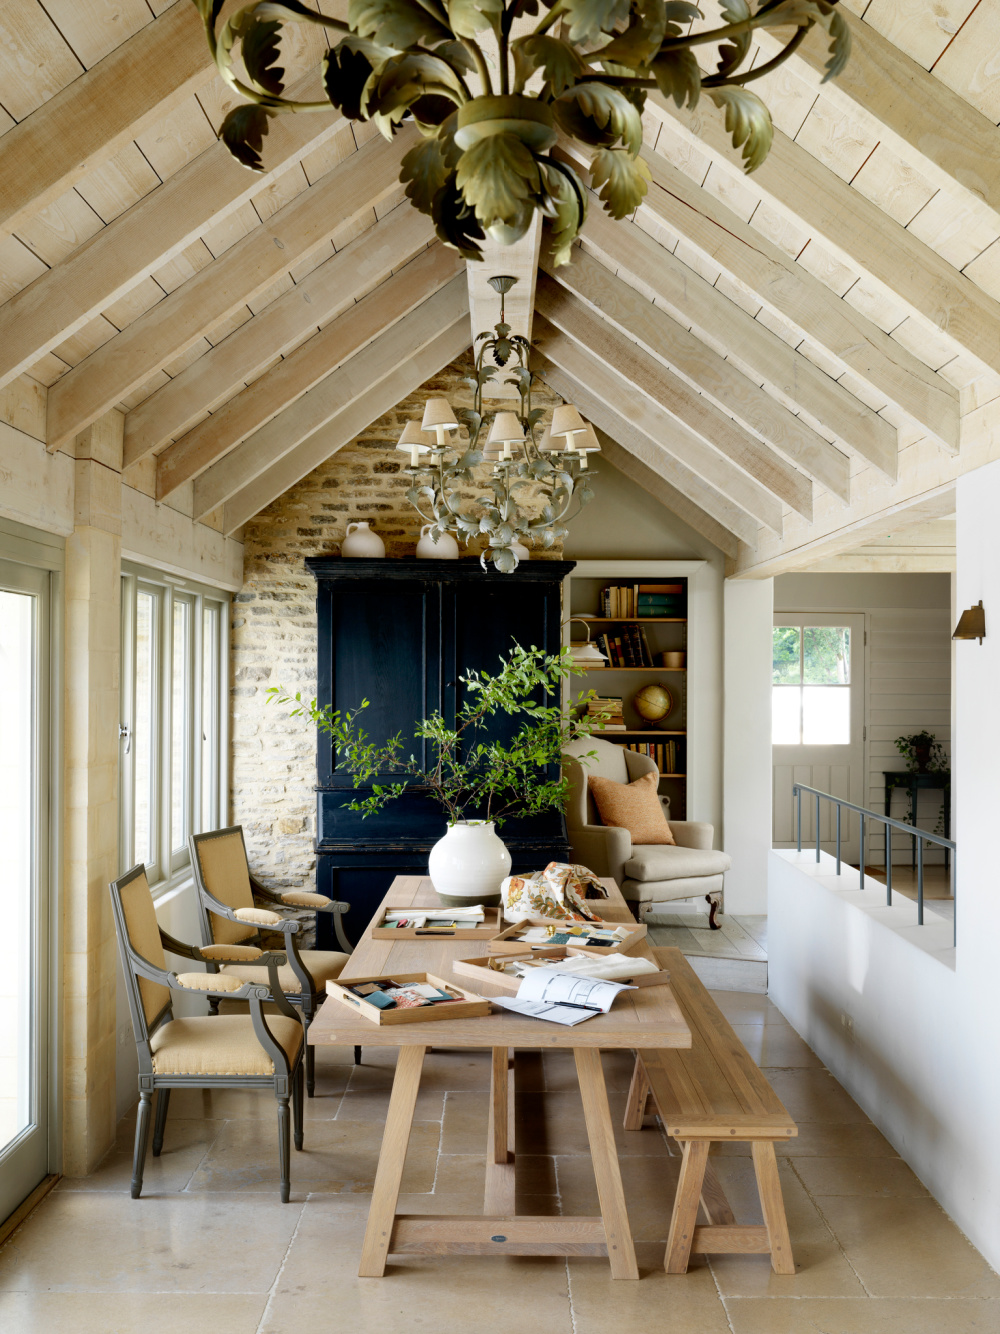 Rustic English Country garden room in a barn conversion - design by Sims Hilditch in THE EVOLUTION OF HOME (Rizzoli, 2022).